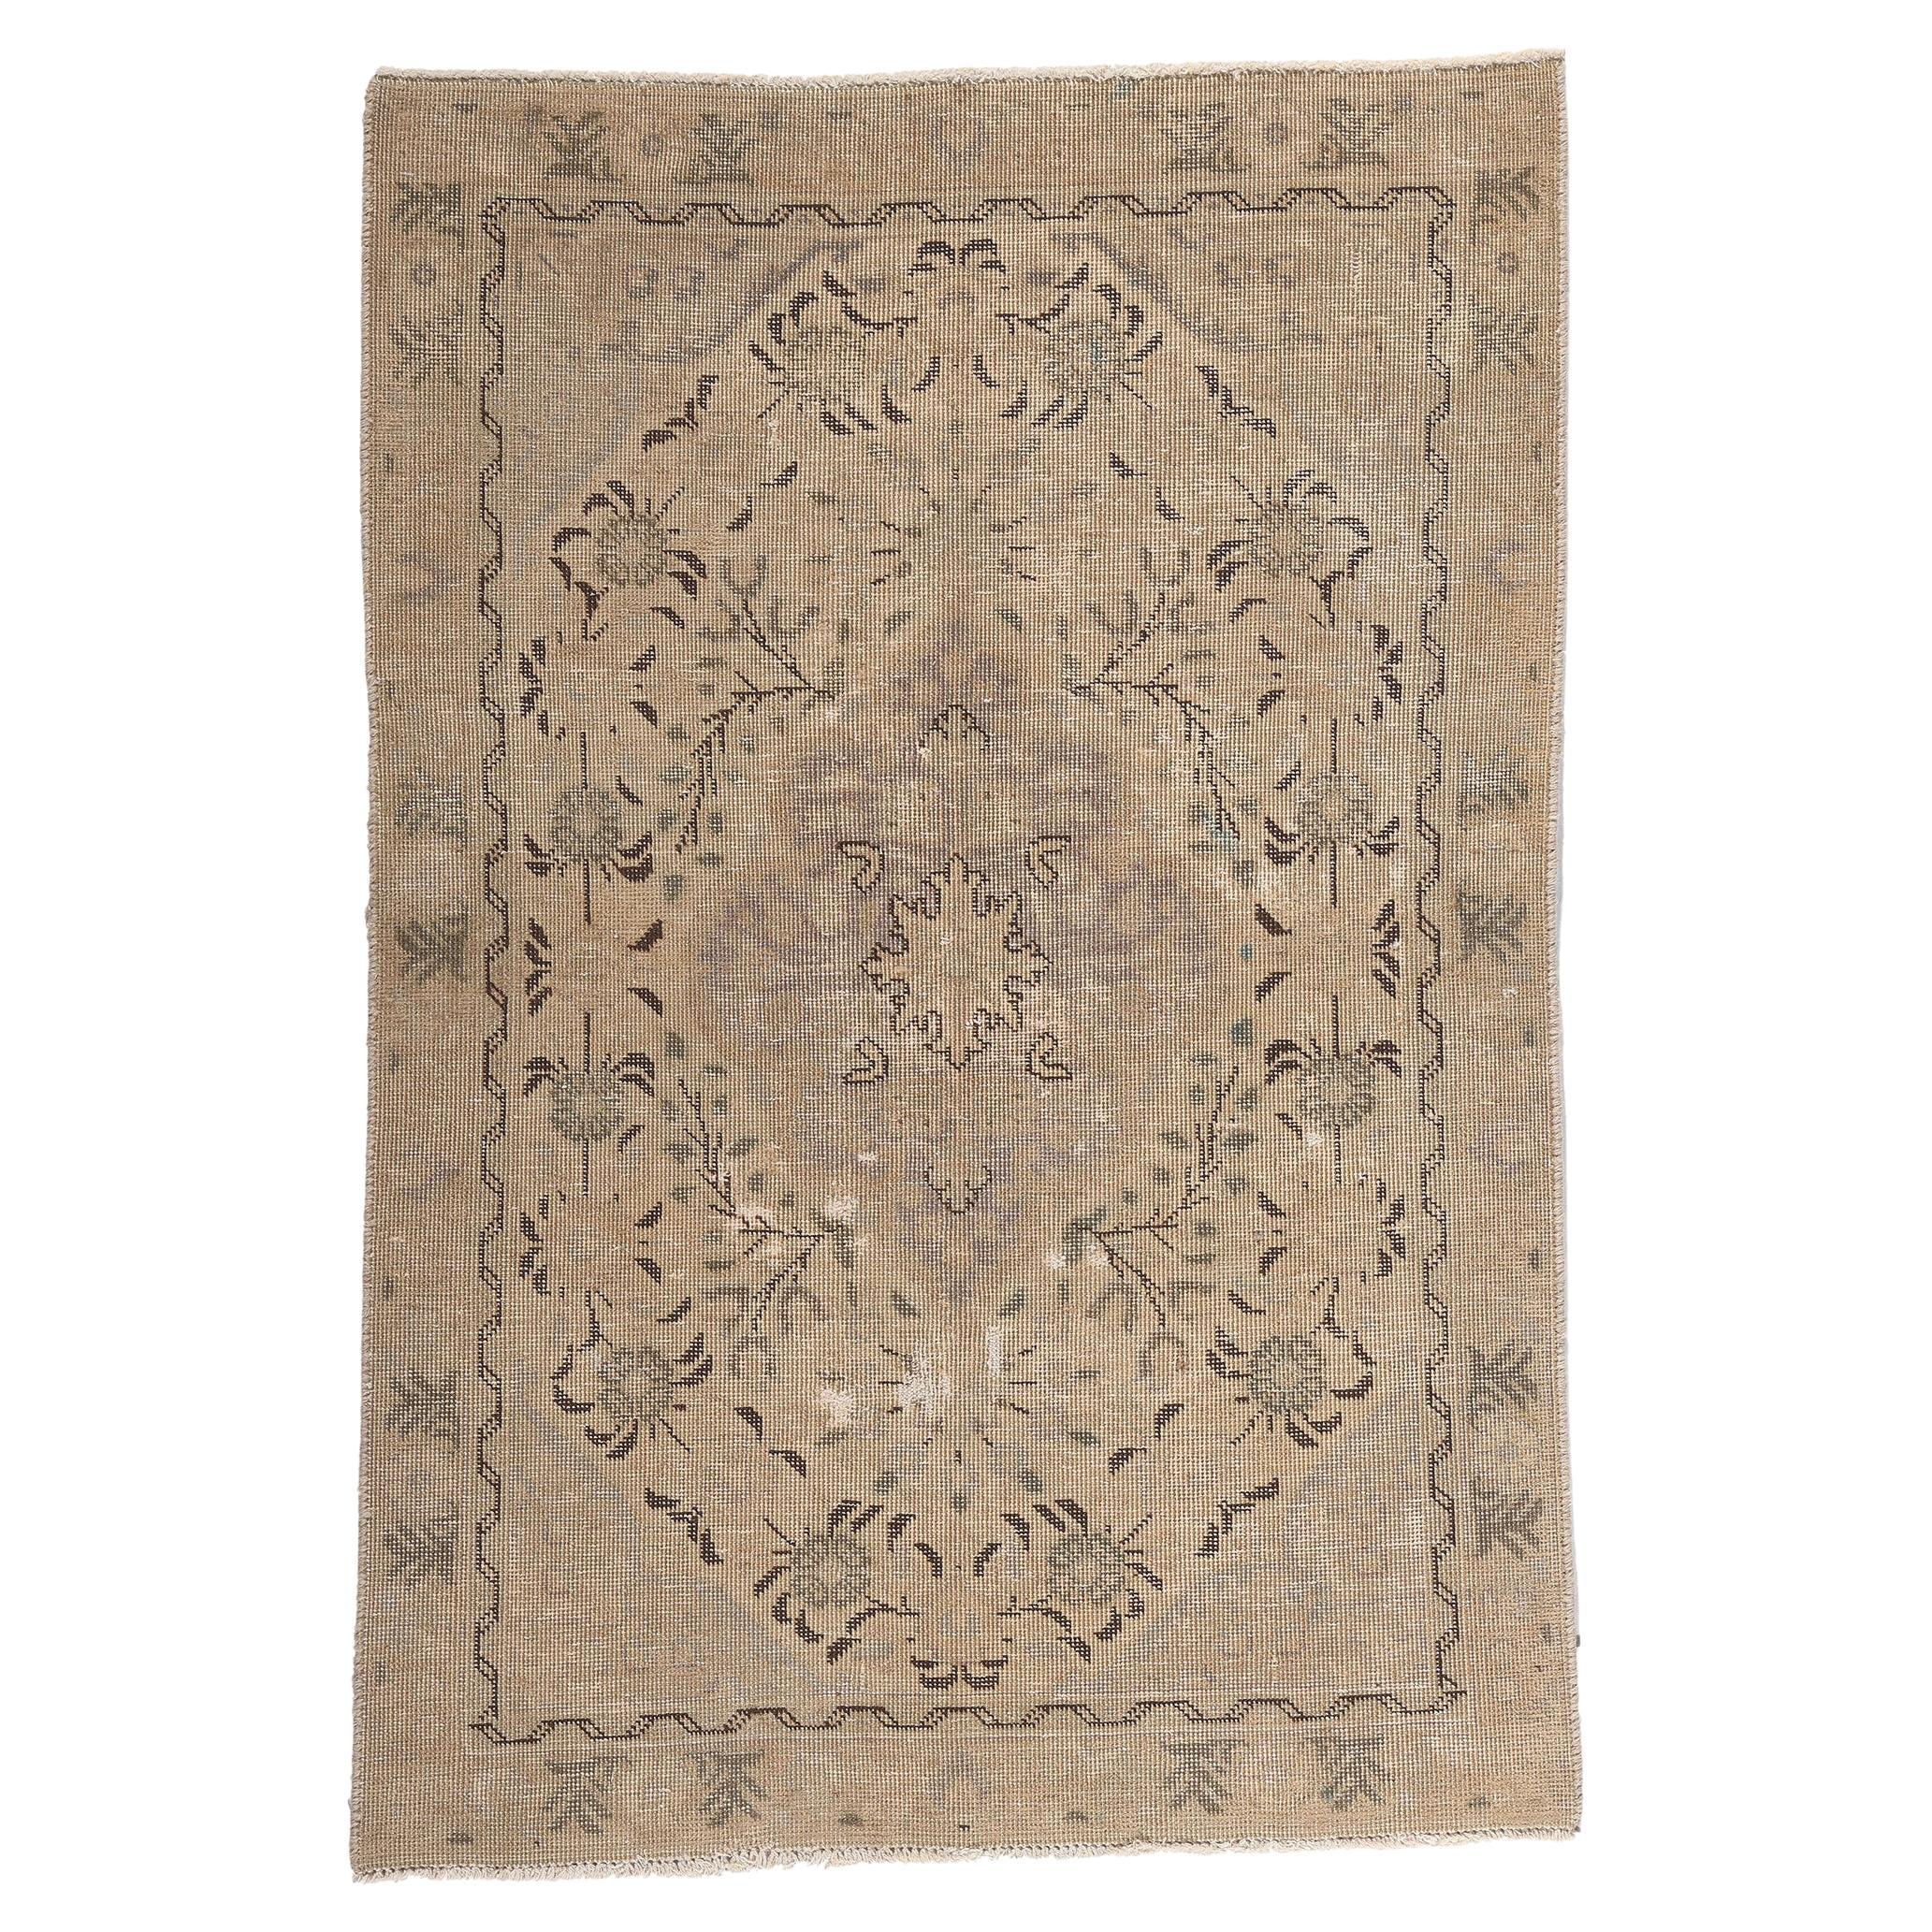 Rustic Vintage Persian Tabriz Rug Warm Neutral Earth-Tone Colors For Sale